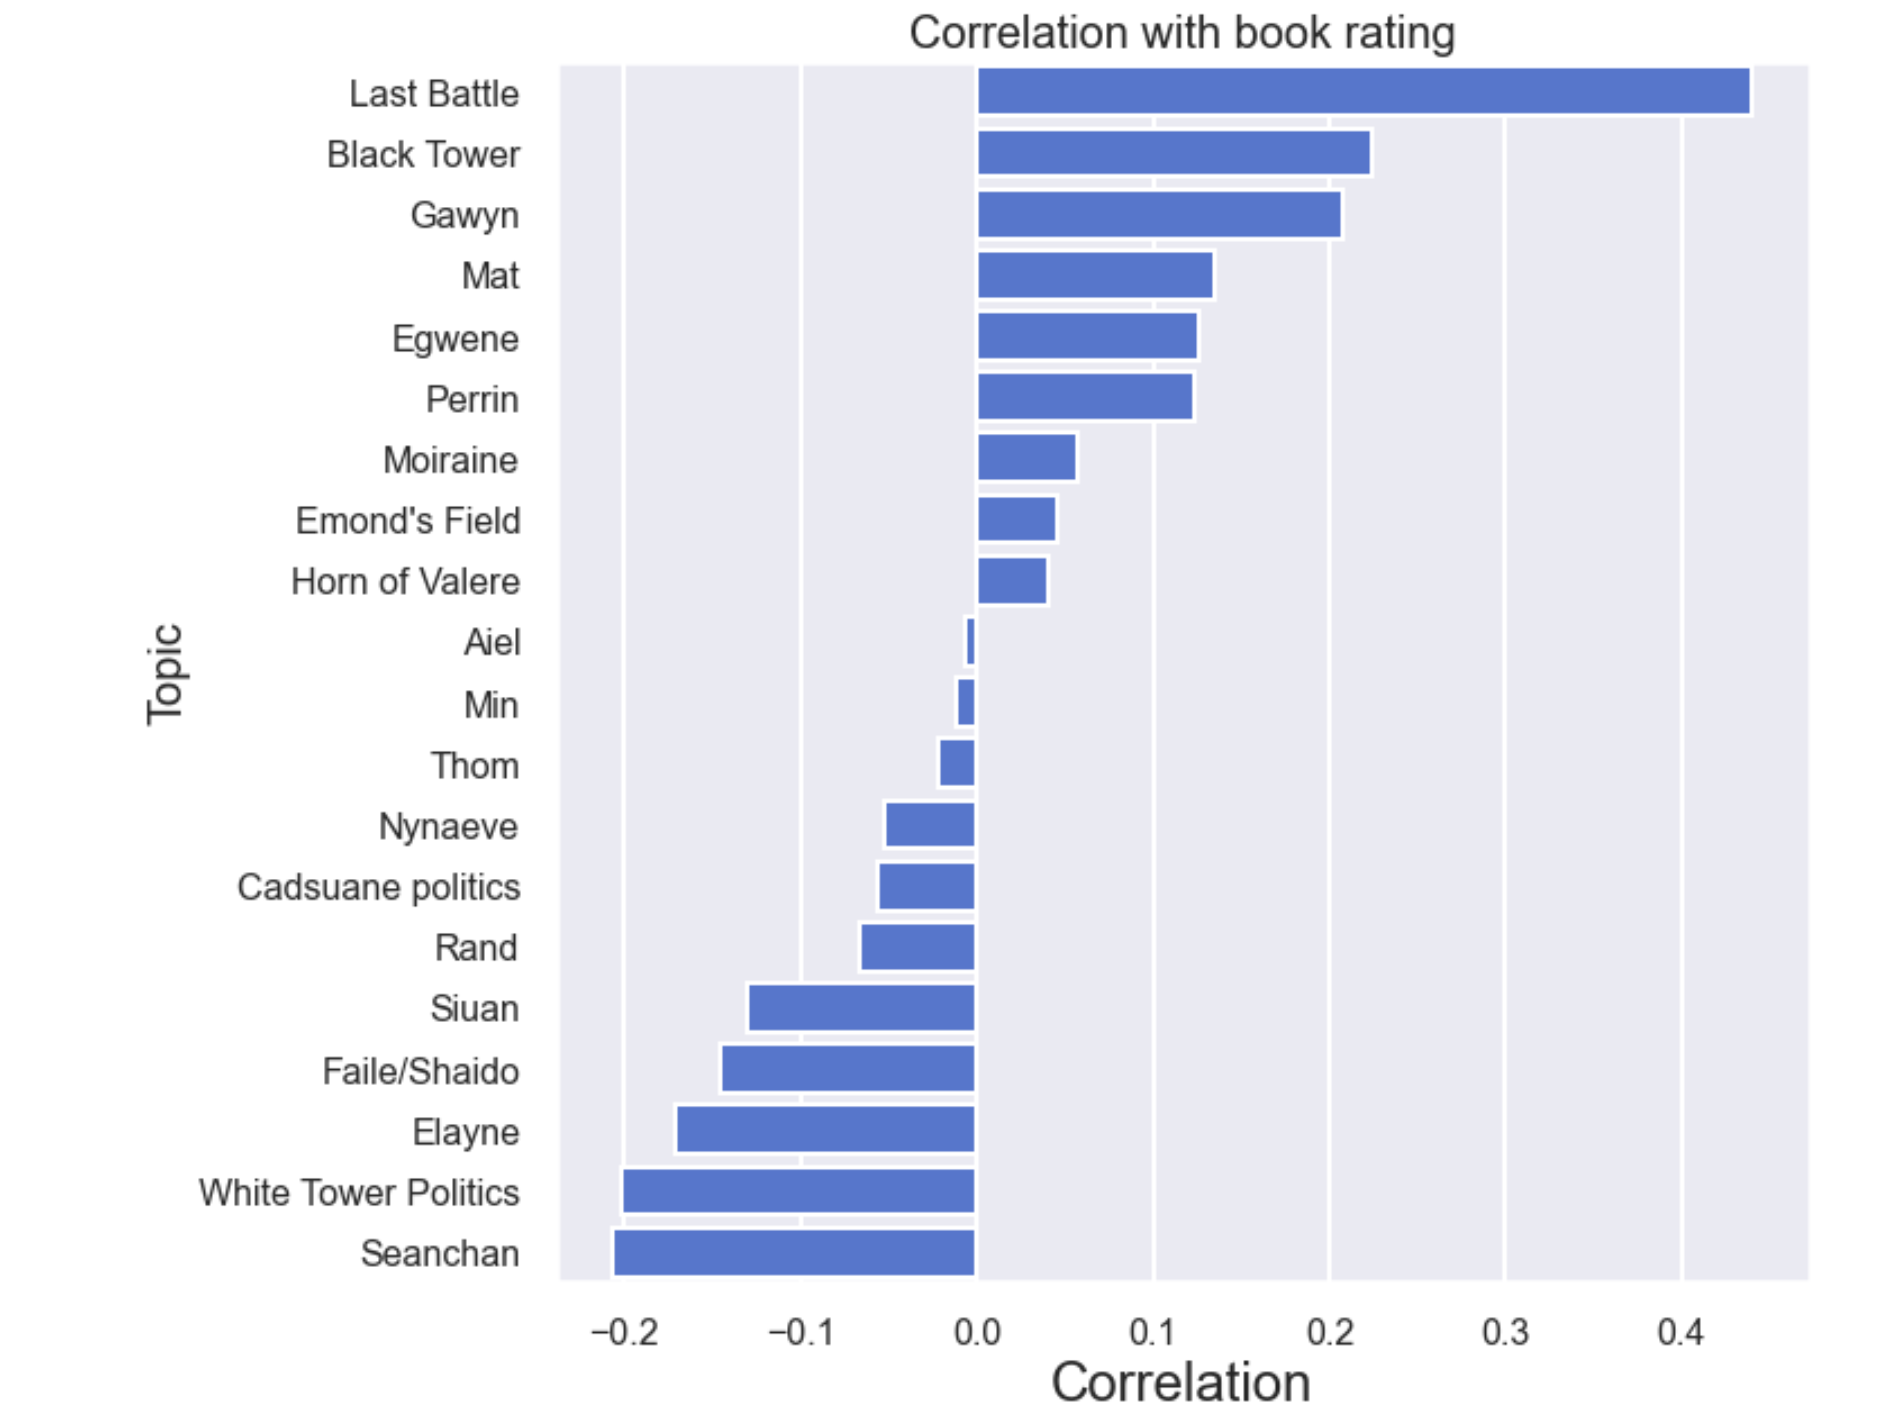 Topics correlation with book ratings